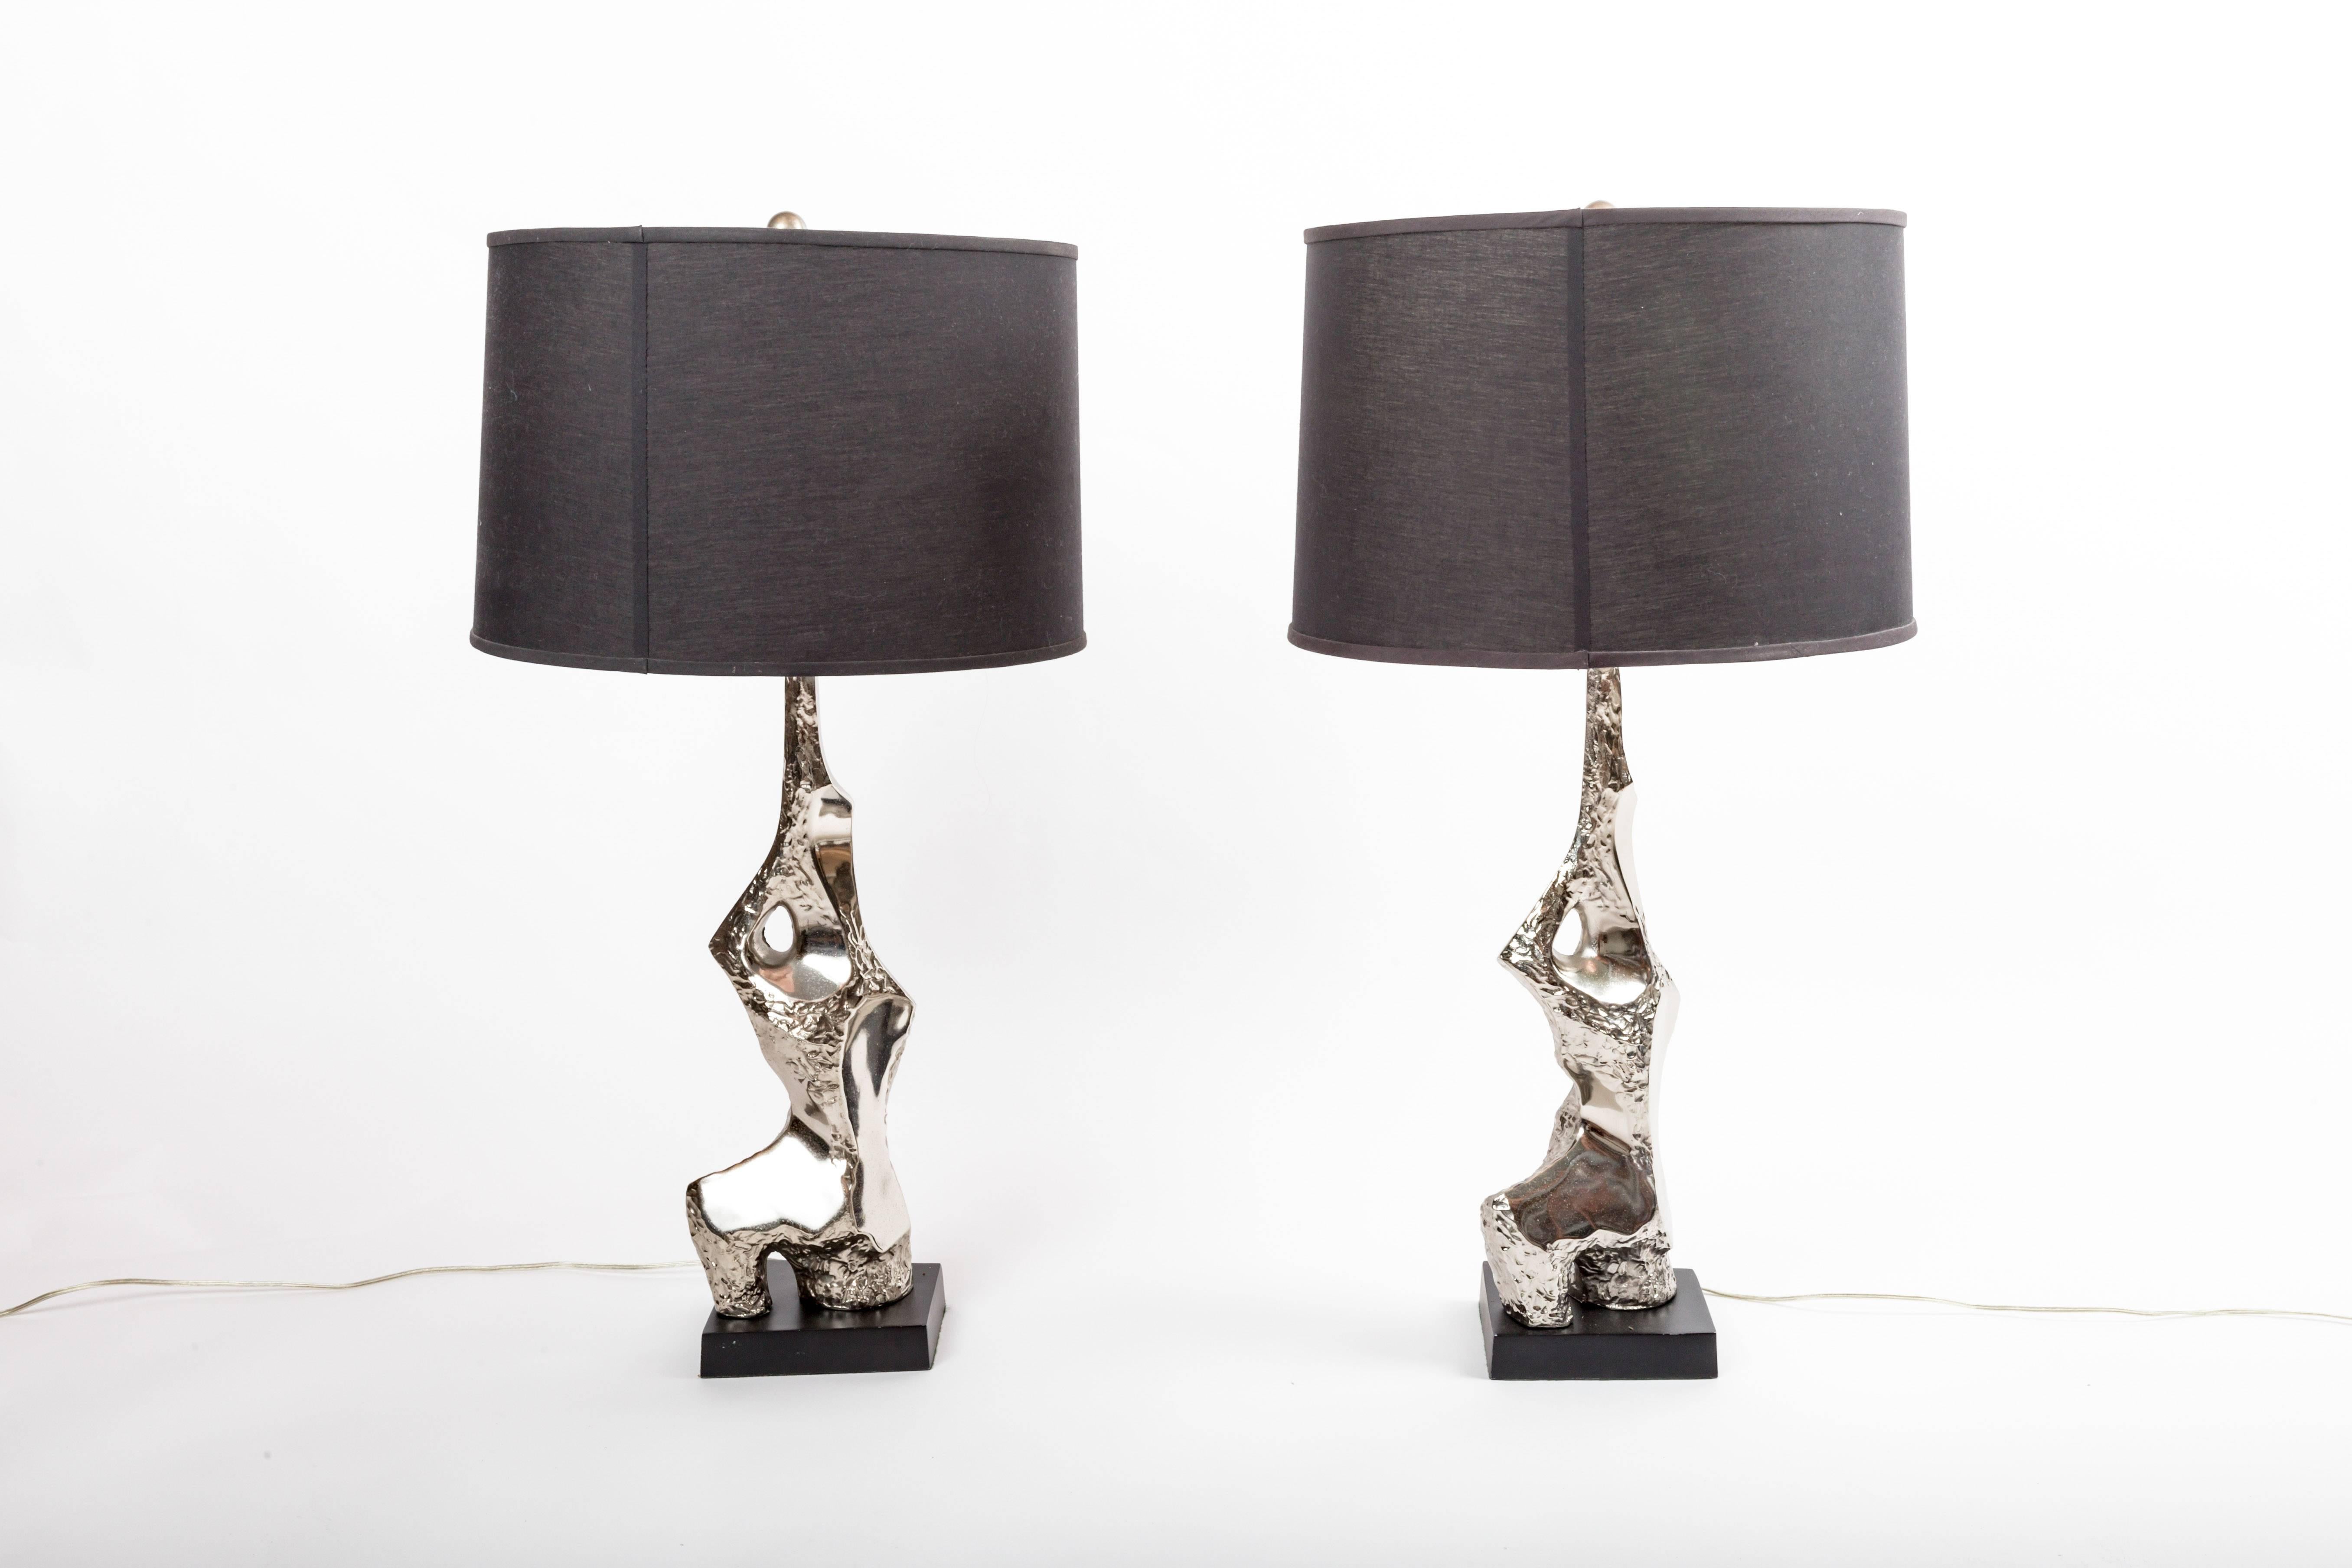 Pair of 1970s Silvered Brutalist Table Lamps by Richard Barr for Laurel Lamp Co. For Sale 2